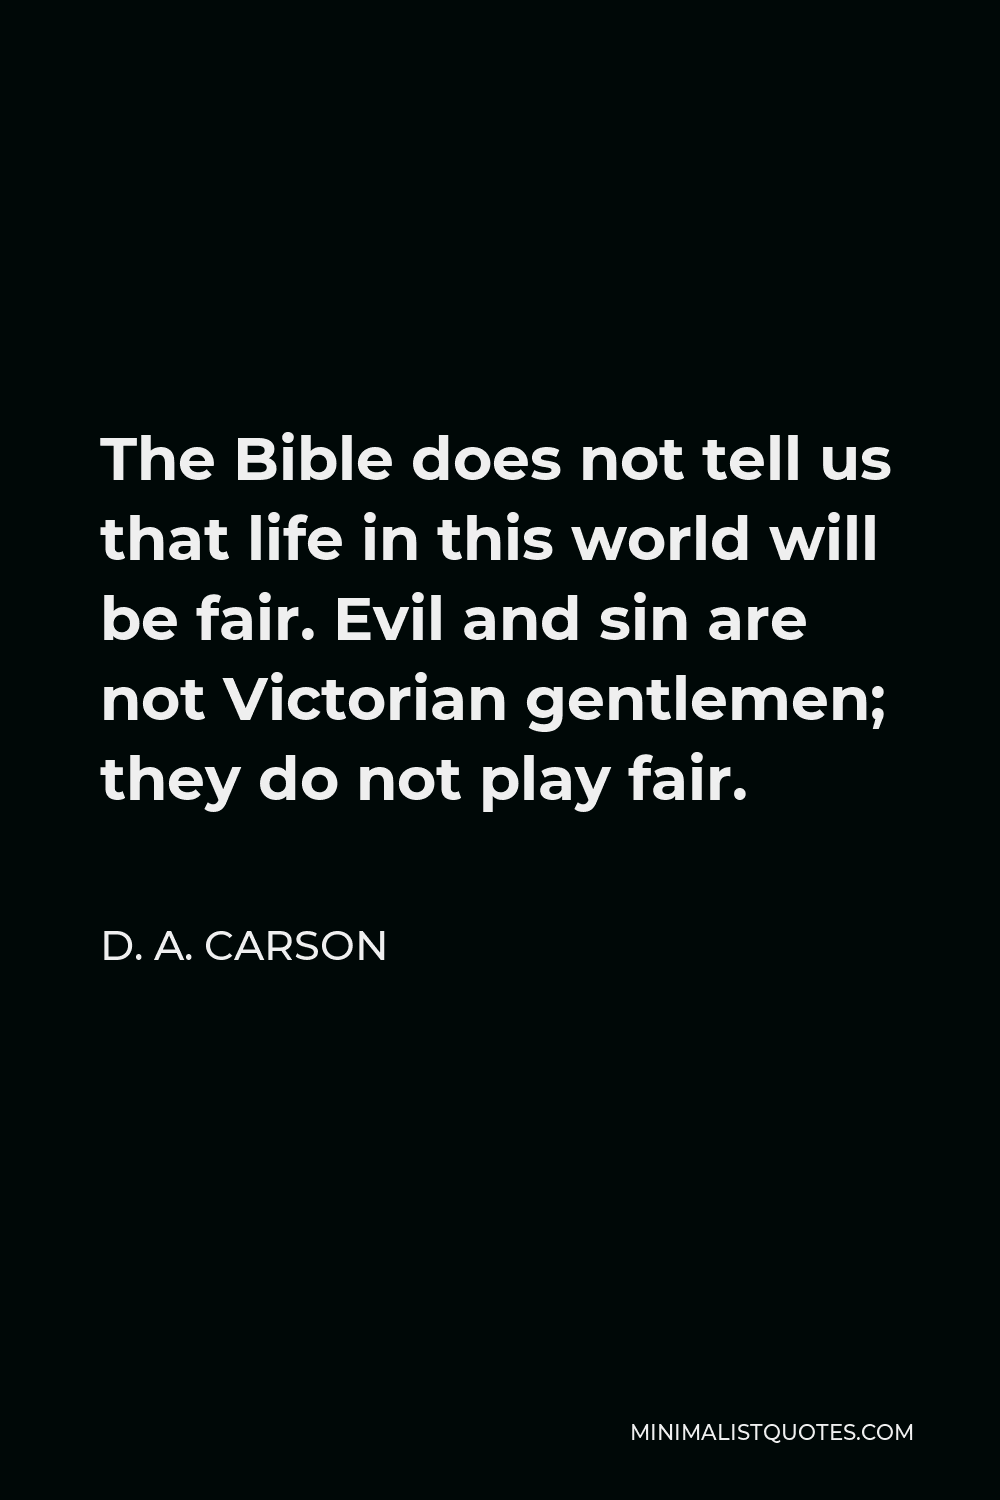 D. A. Carson Quote - The Bible does not tell us that life in this world will be fair. Evil and sin are not Victorian gentlemen; they do not play fair.